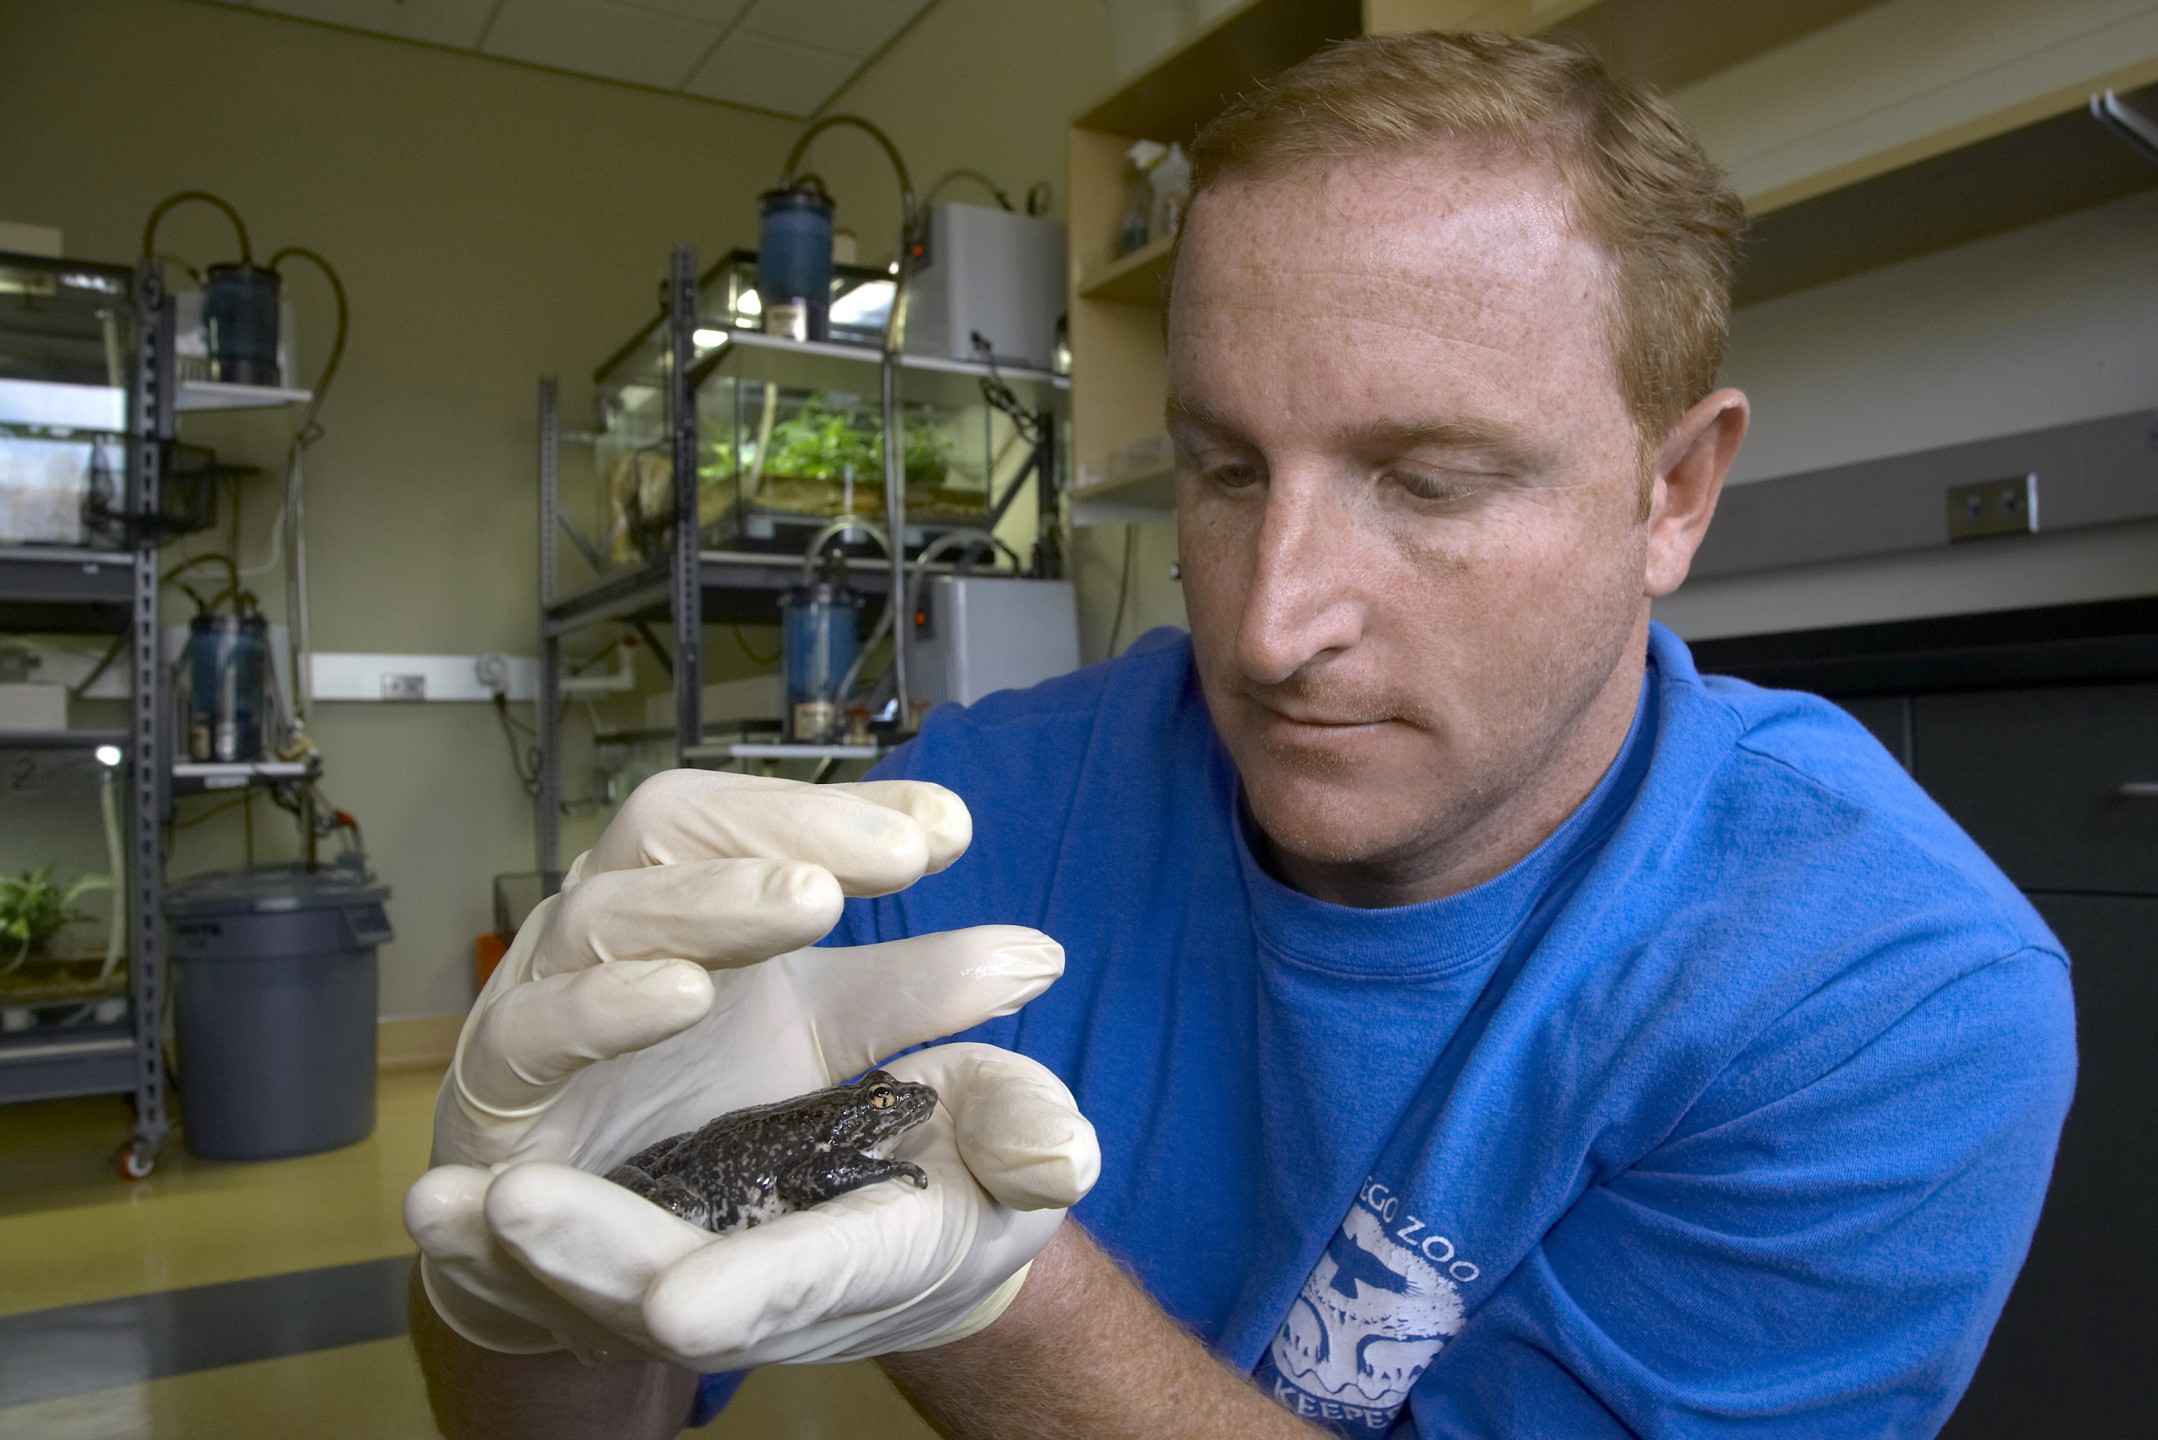 Jeffrey Lemm, senior research coordinator in the Behavioral Ecology division, holds one of the adult mountain yellow-legged frogs, a critically endangered species that was brought into the ZSSD program for breeding and conservation study.